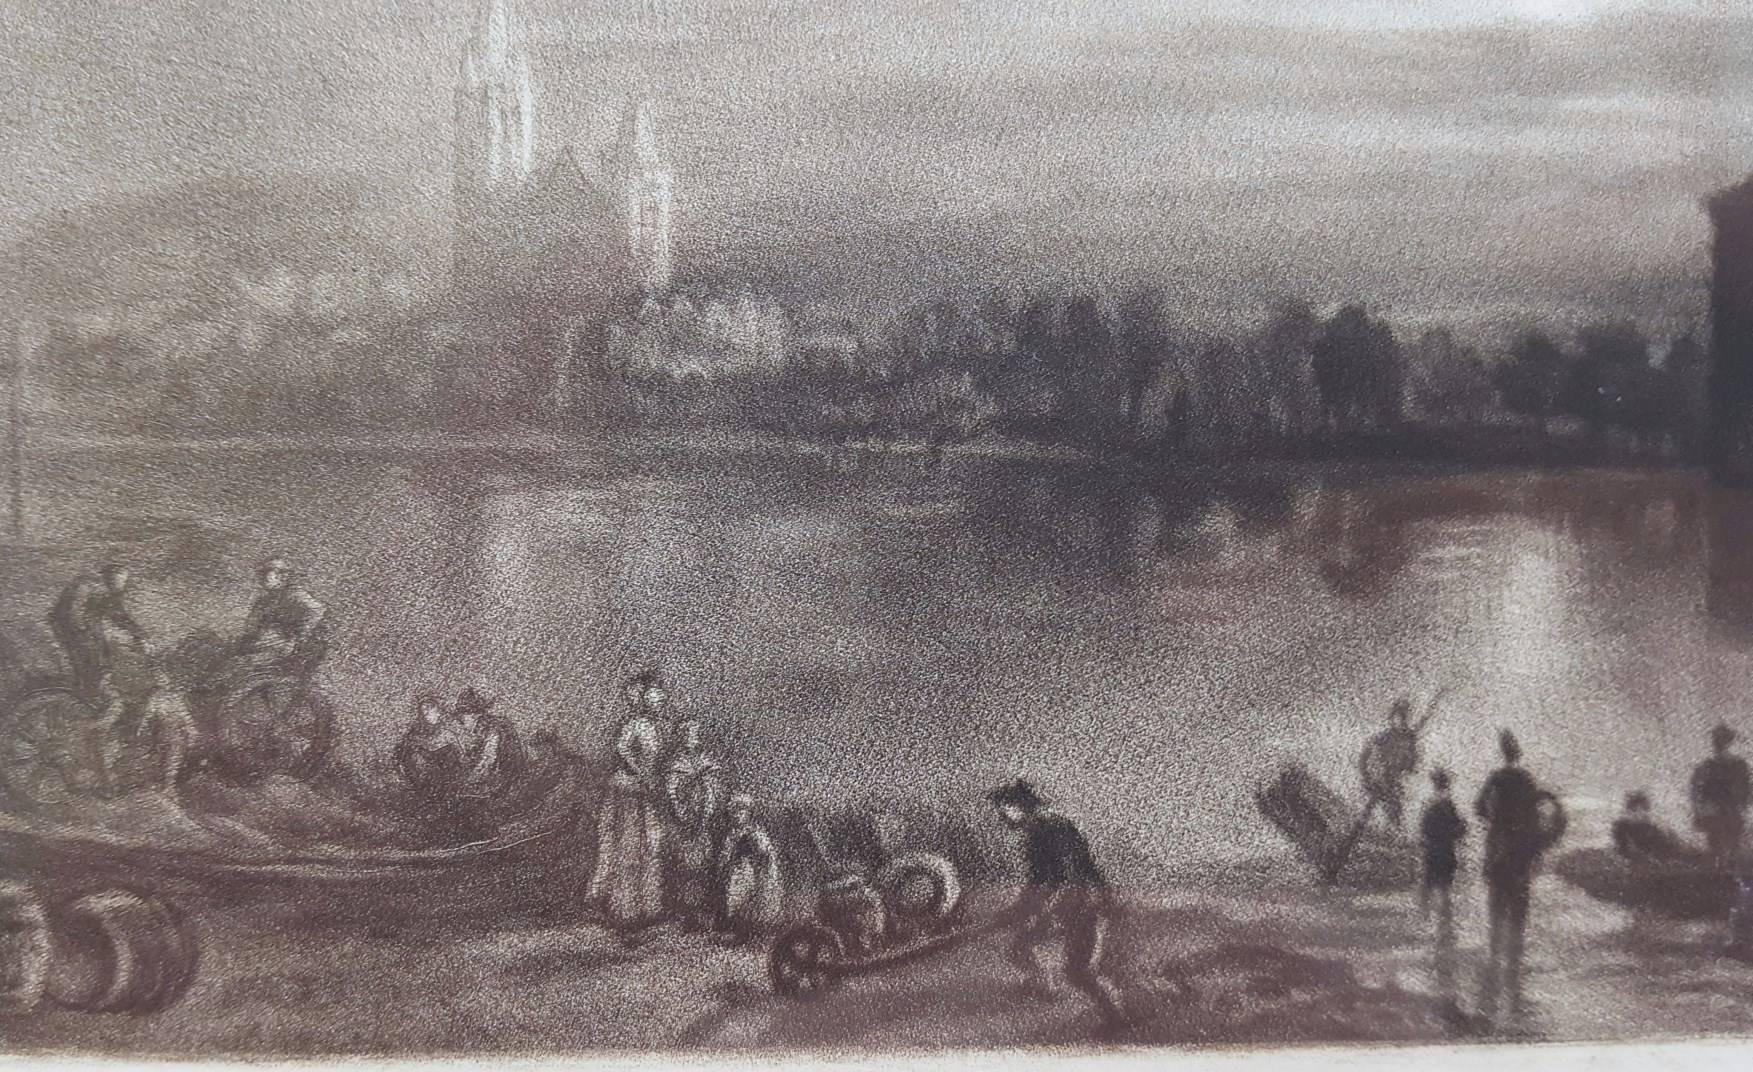 An original copper plate stipple engraving on wove paper by an unknown presumably British artist titled "Evening Lake", c. 1830. Subject very much alike English Romanticist landscape painter Joseph Mallord William Turner, R.A.. Frame